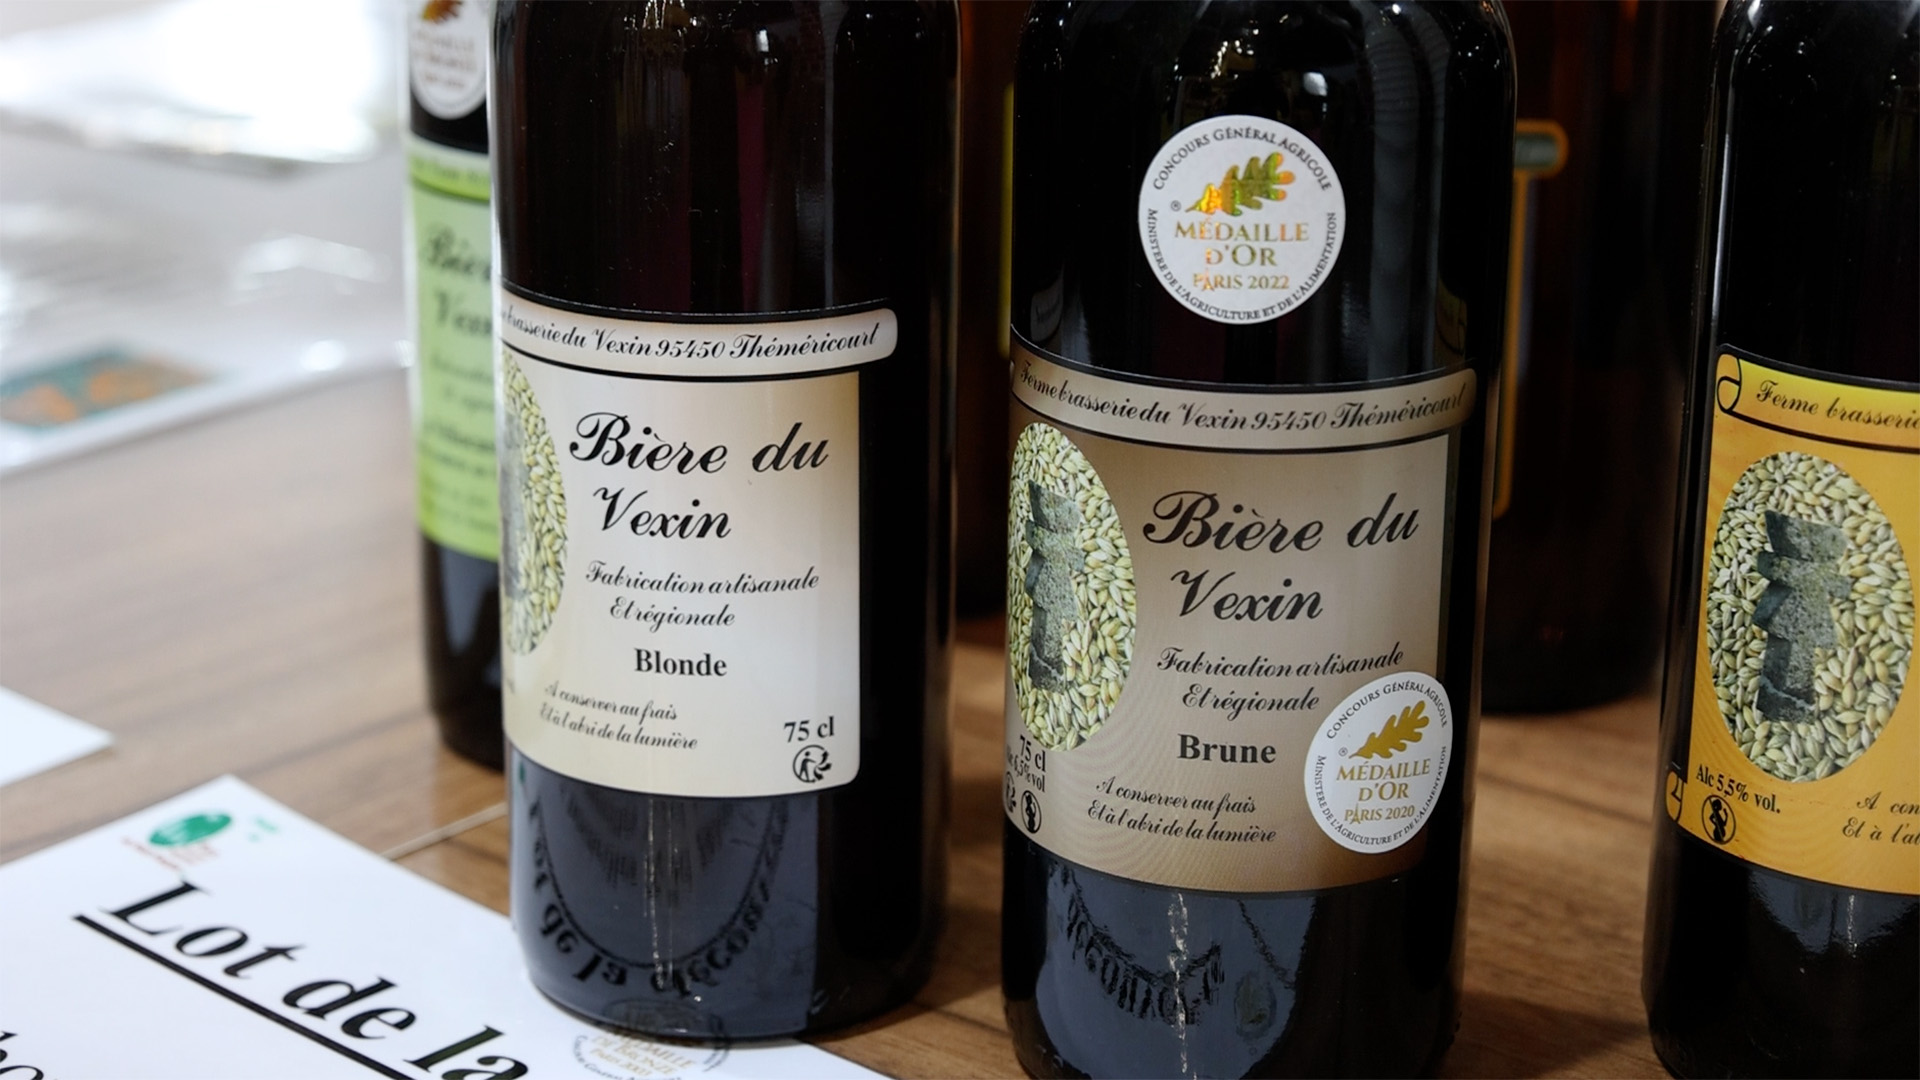 Vexin beer (Val d'Oise) rewarded at the Agricultural Show